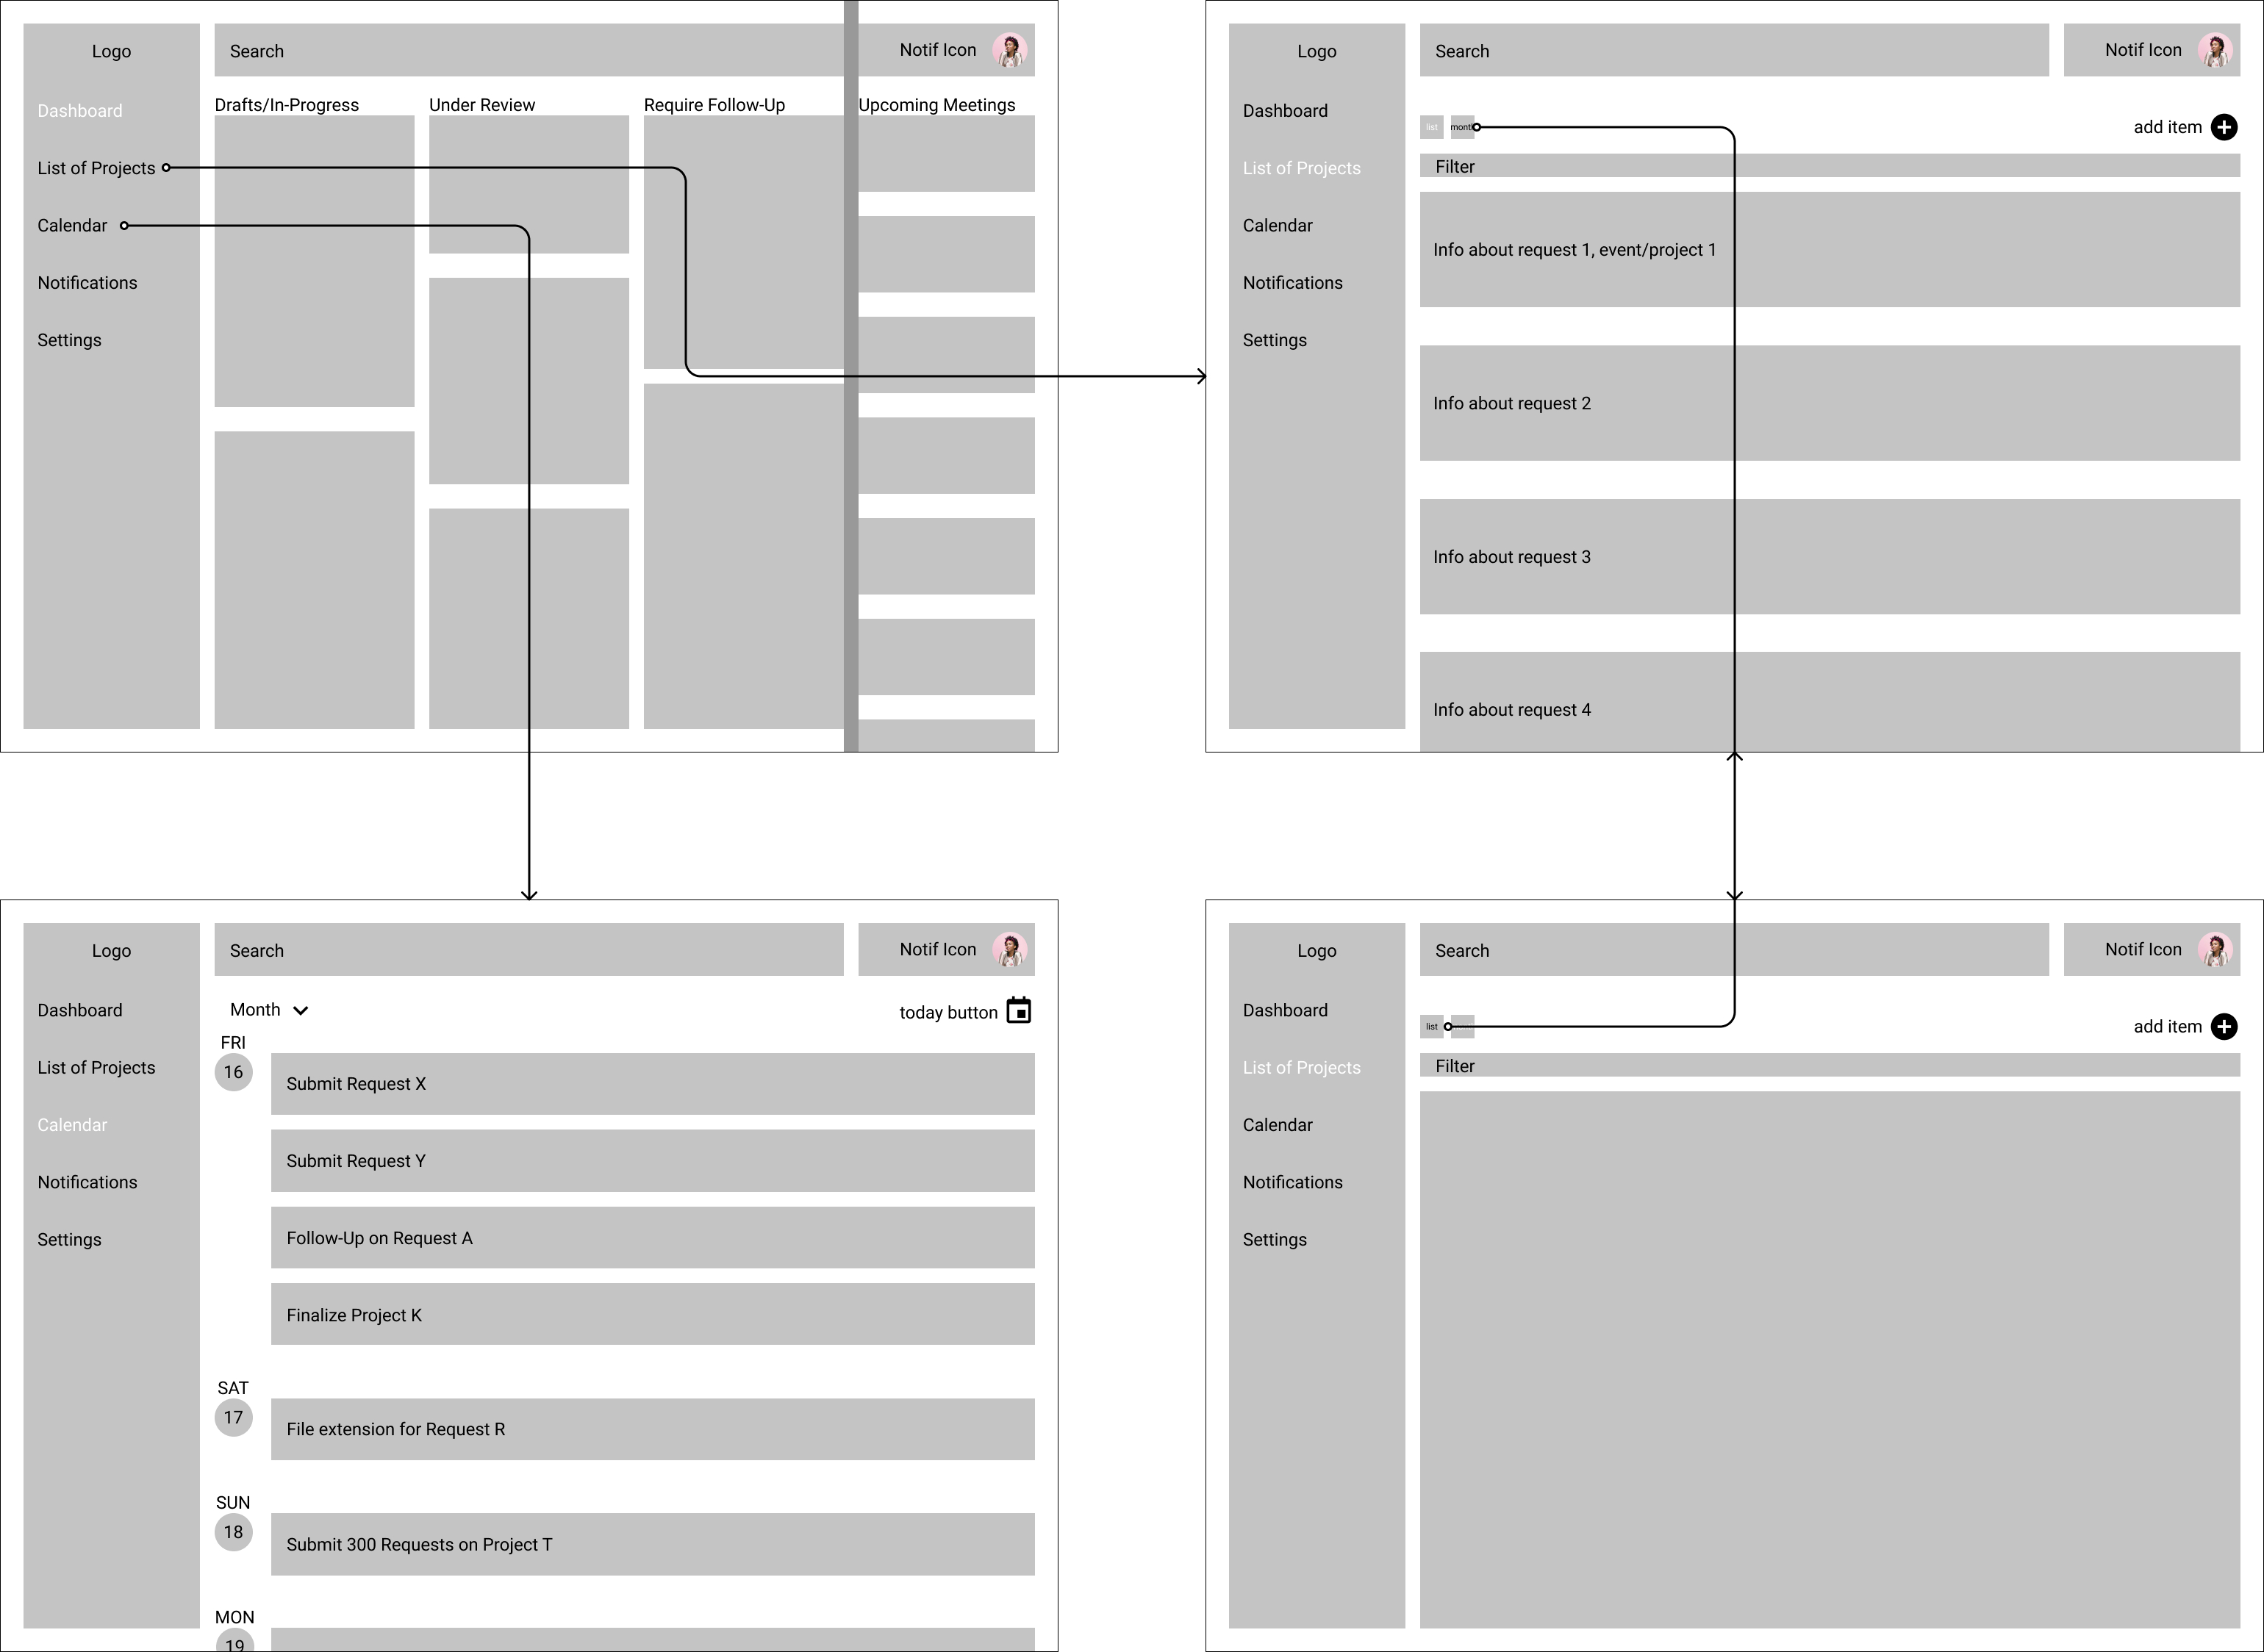 Lo-Fi wireframes of the MuckRock project